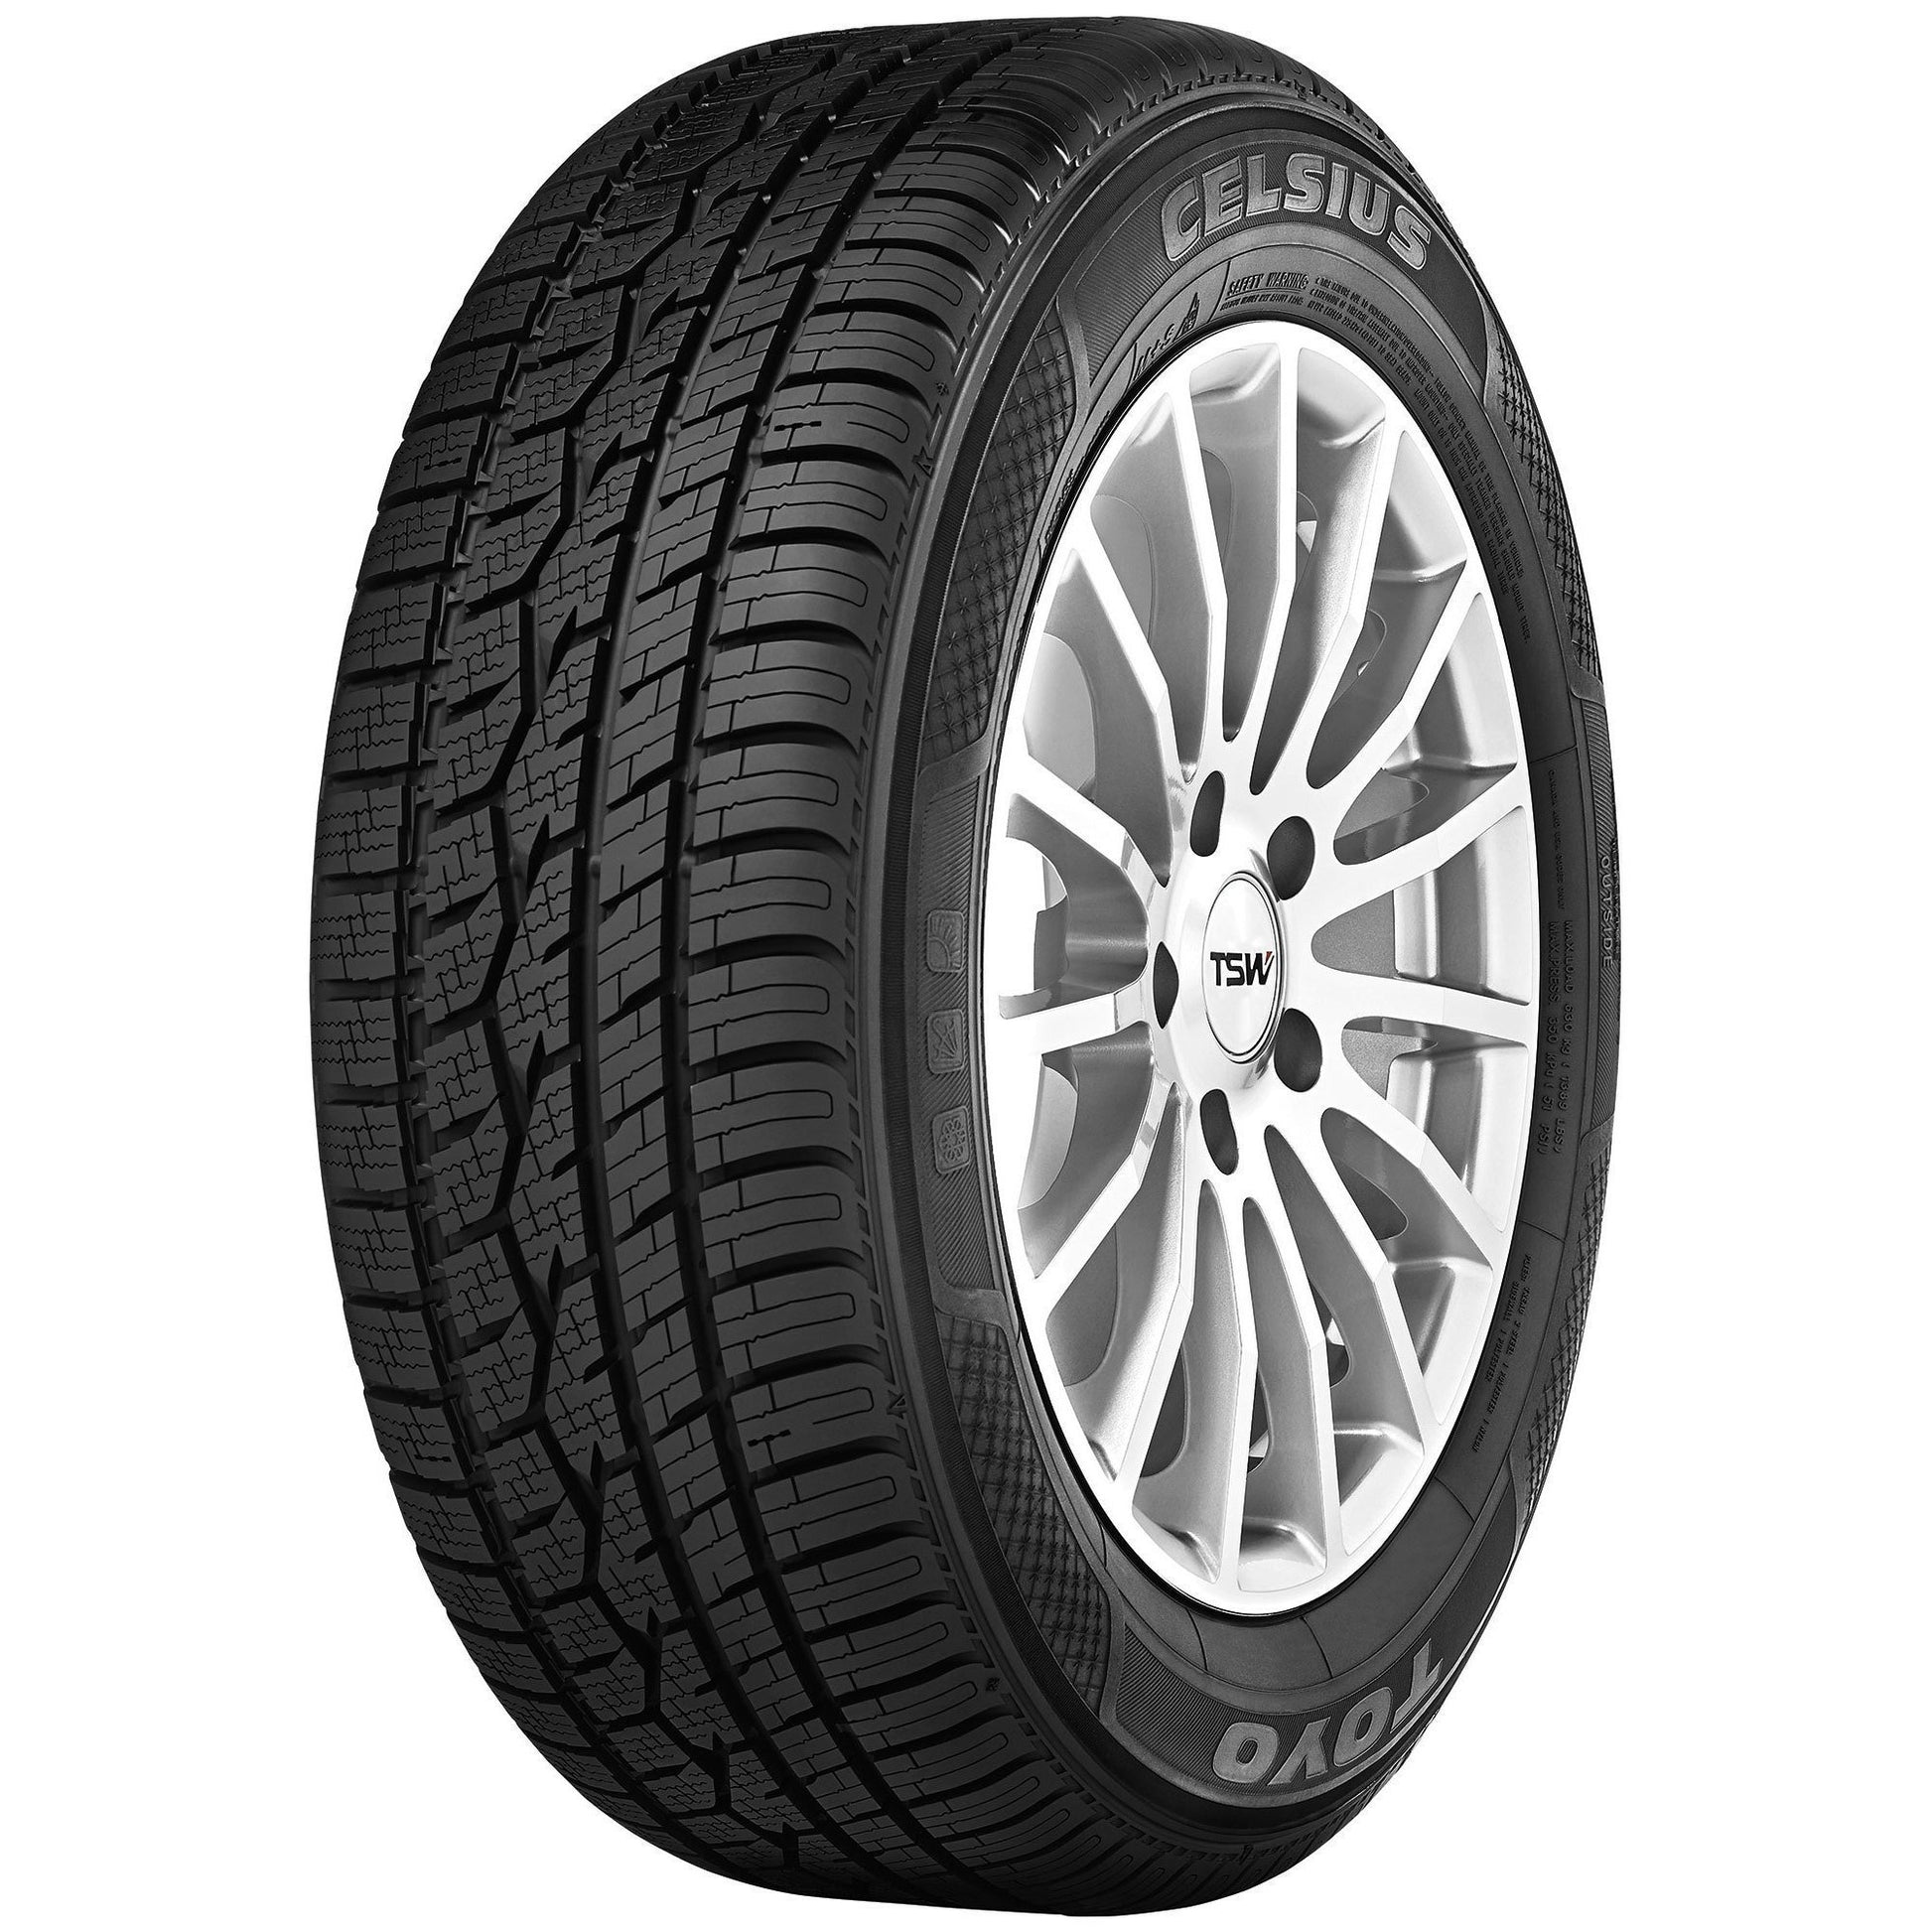 Toyo 235/40R18 95V Celsius Tire - Universal (129510)-toy129510-129510-Tires-Toyo-235-40-18-JDMuscle